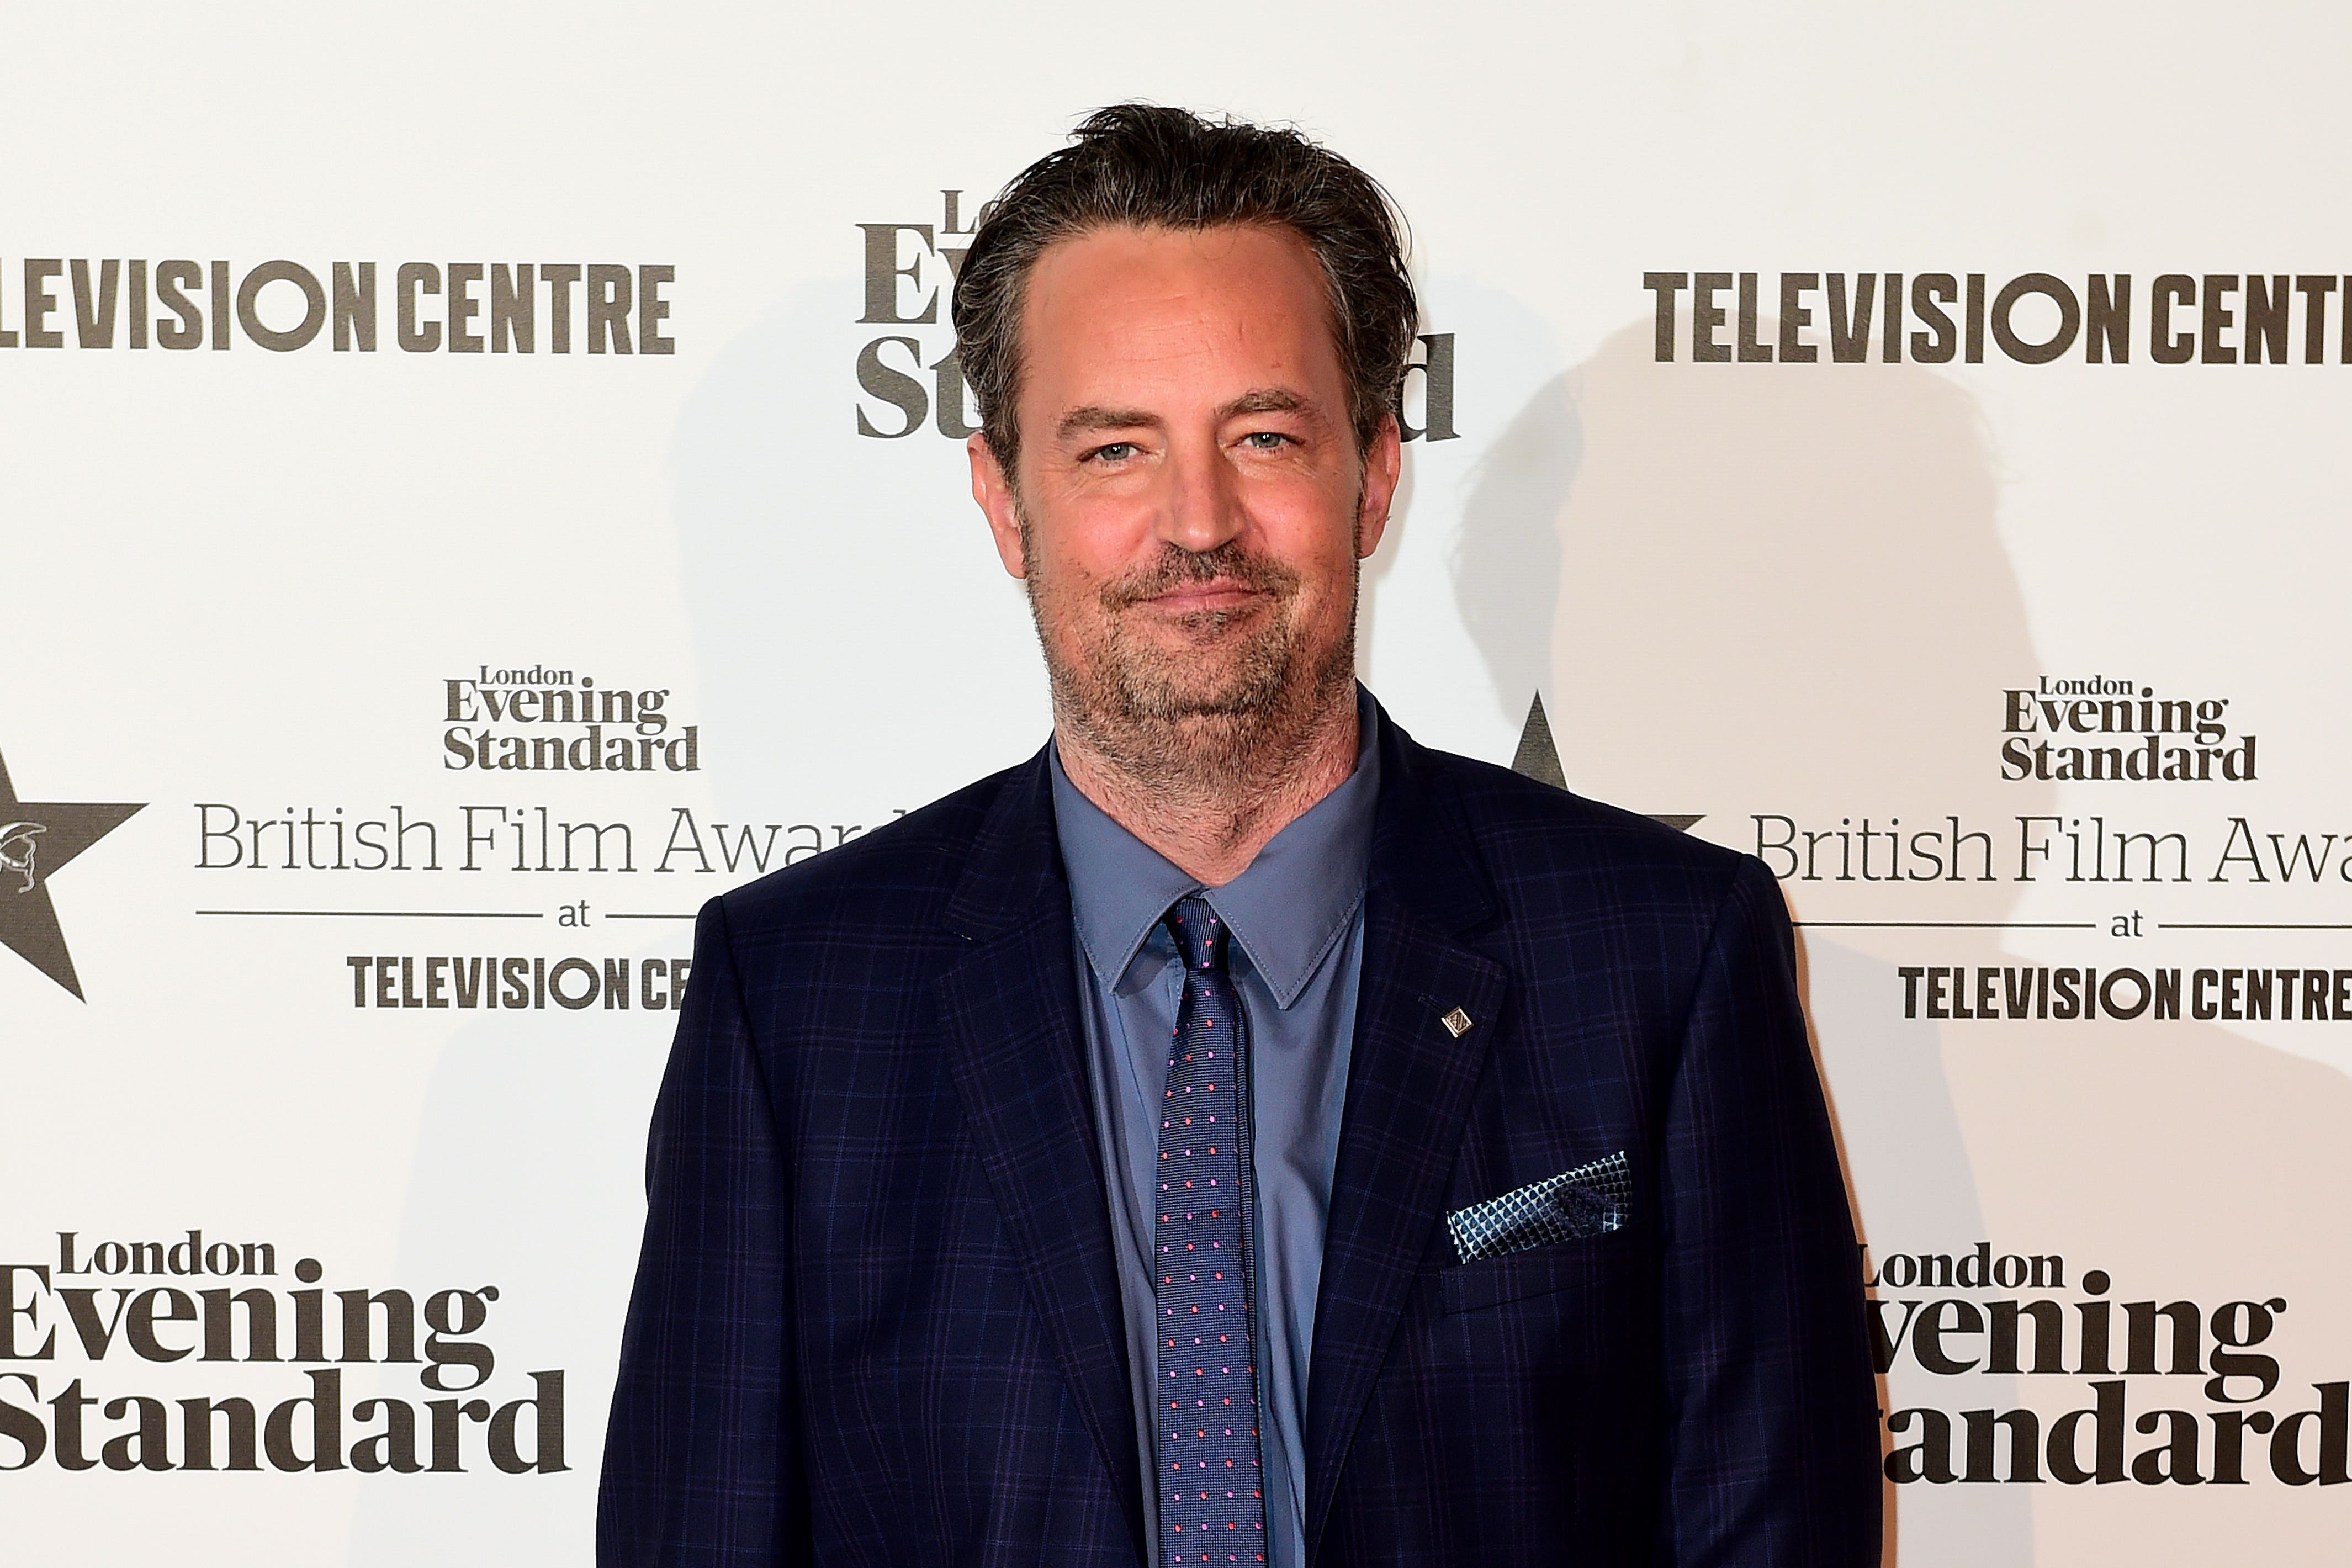 Matthew Perry died earlier this week aged 54